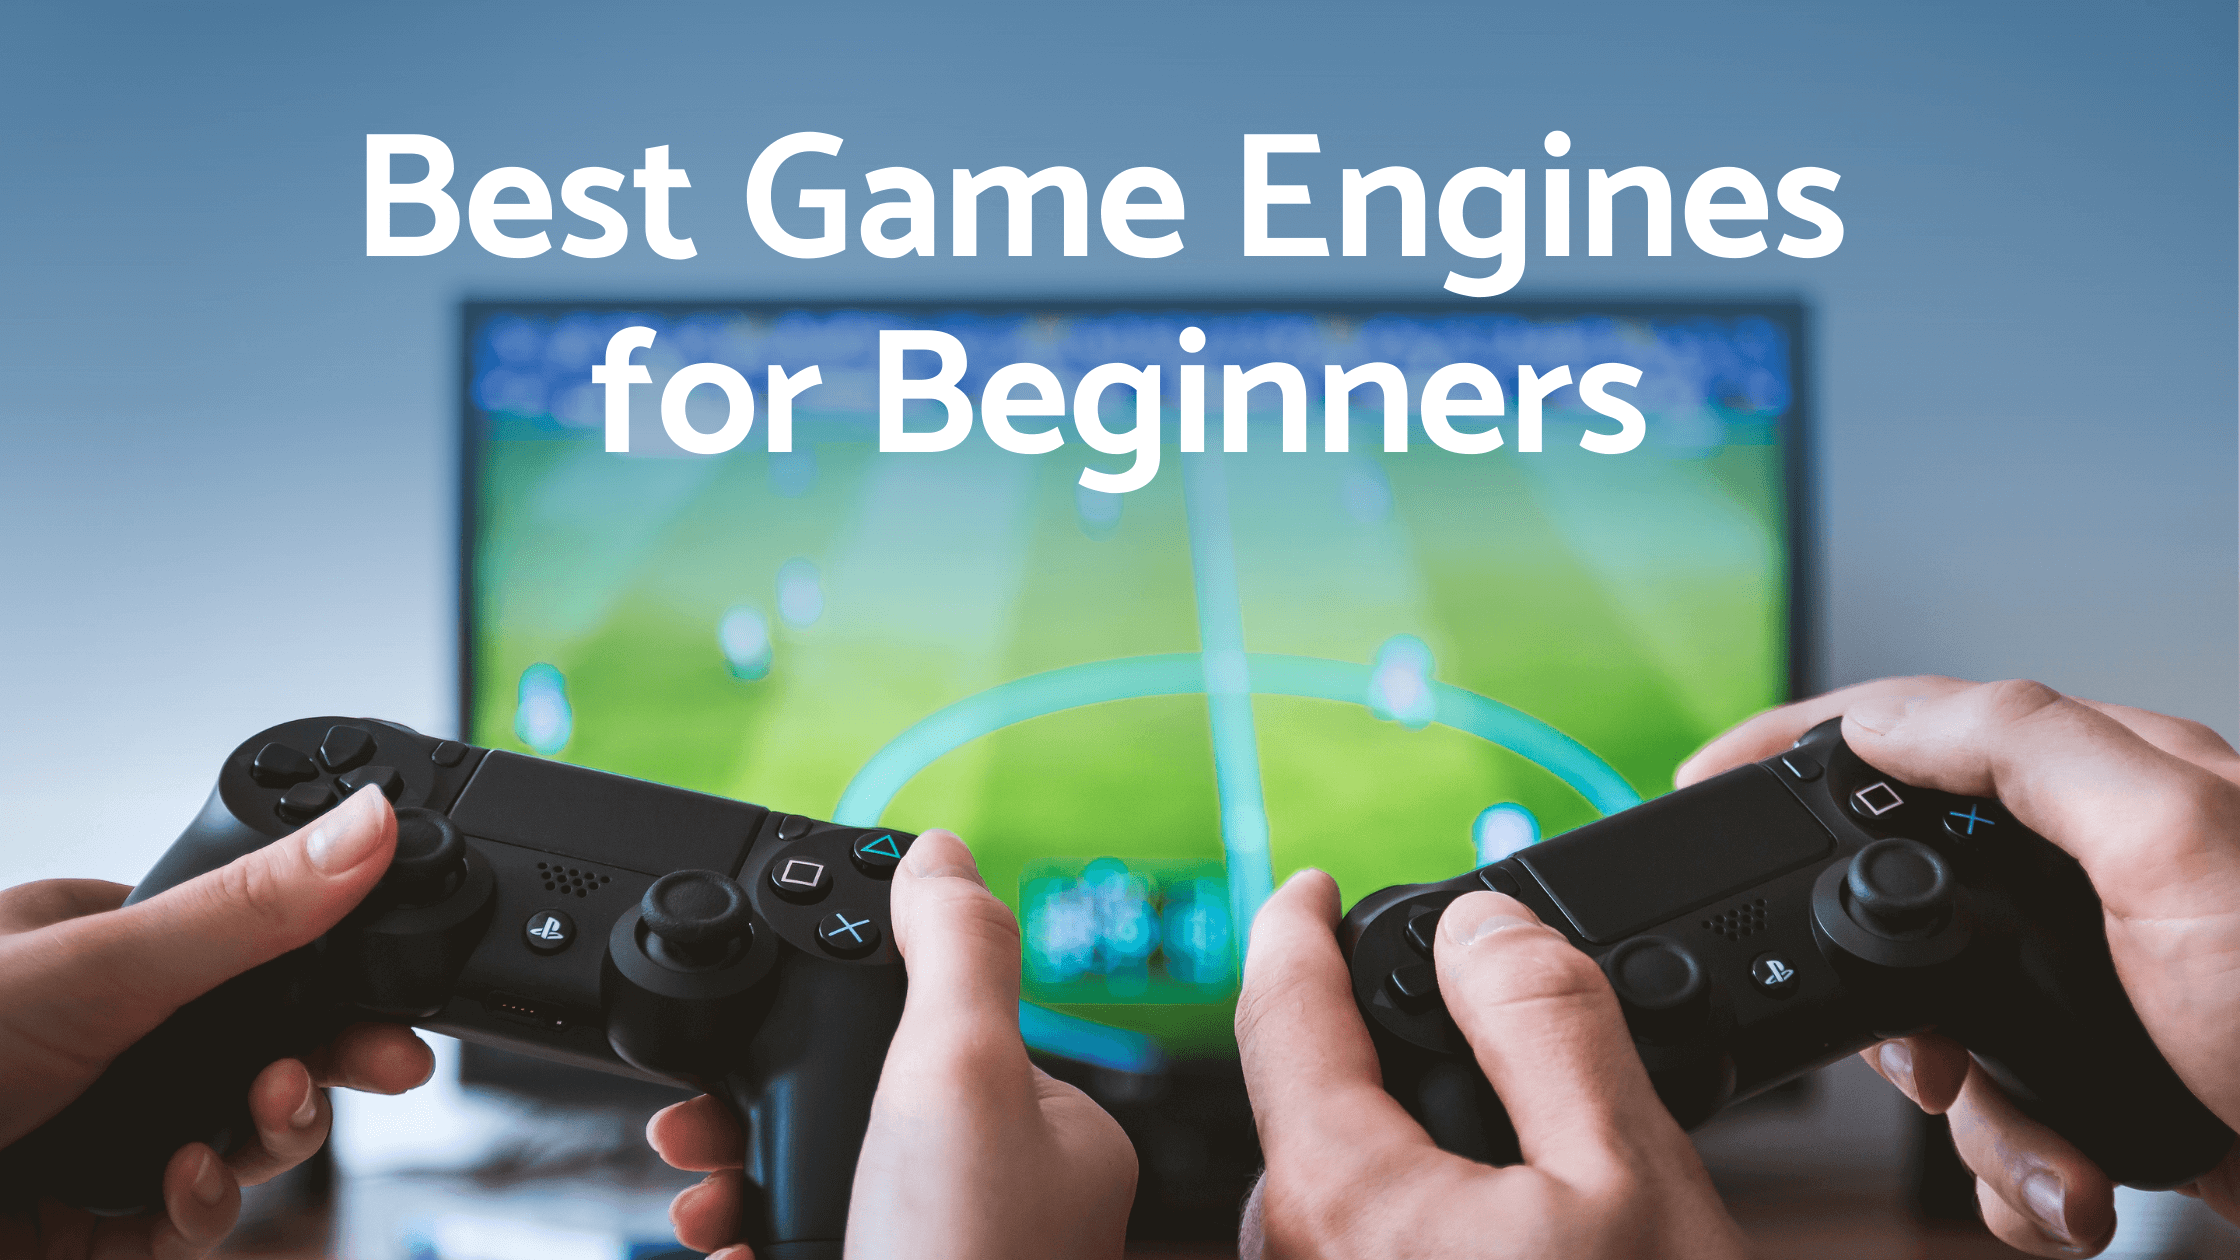 Best Game Engines for Beginners